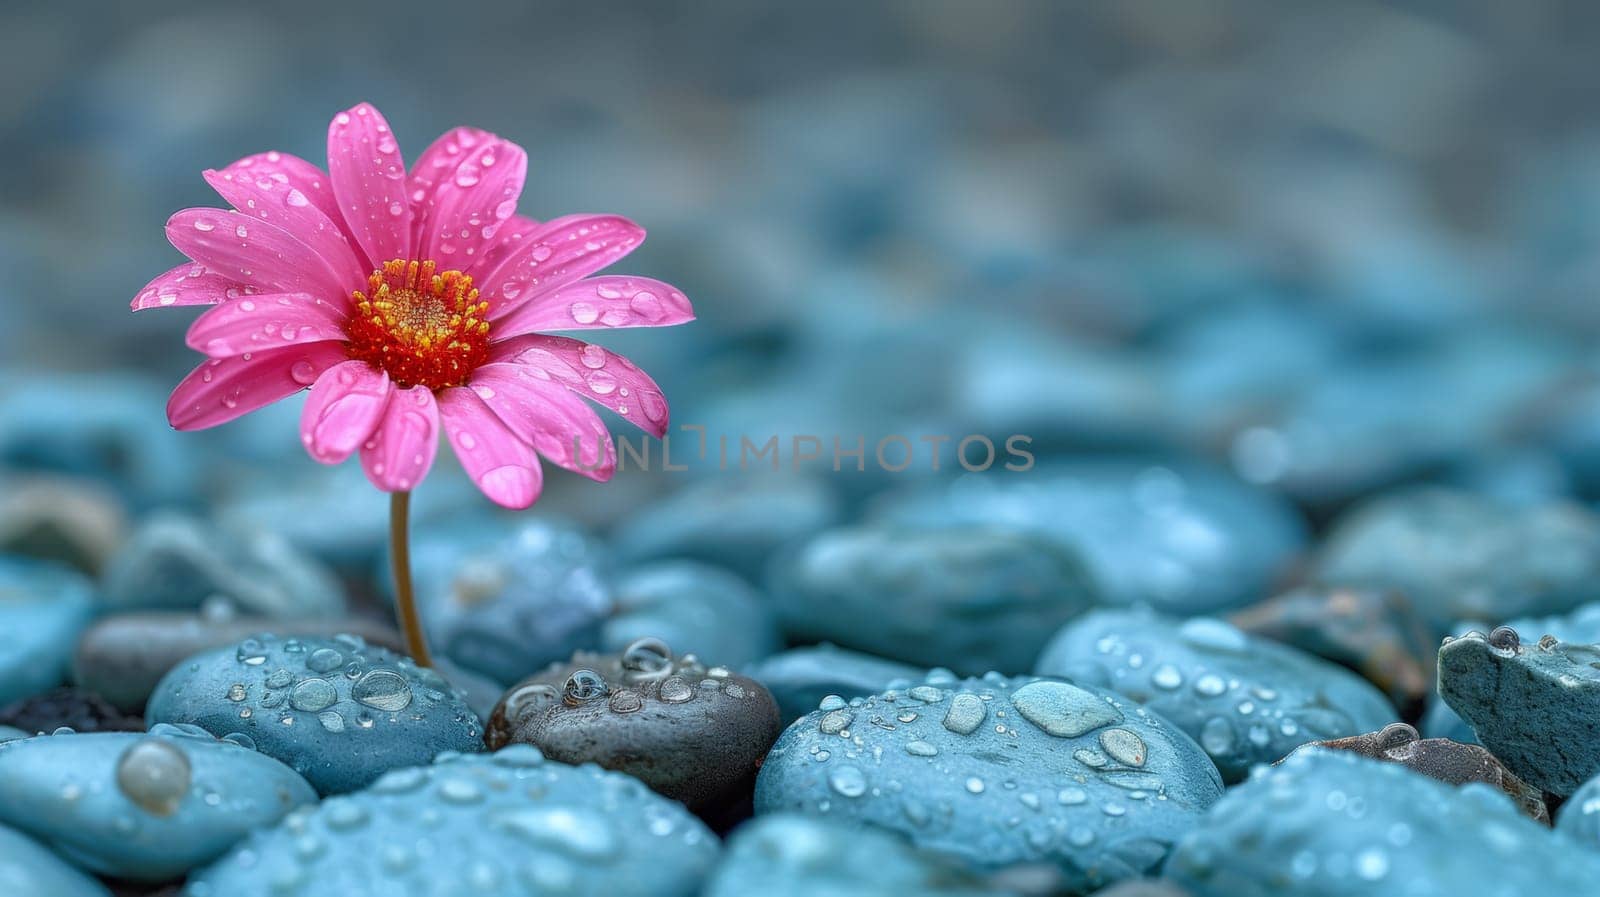 A single pink flower in a sea of blue stones